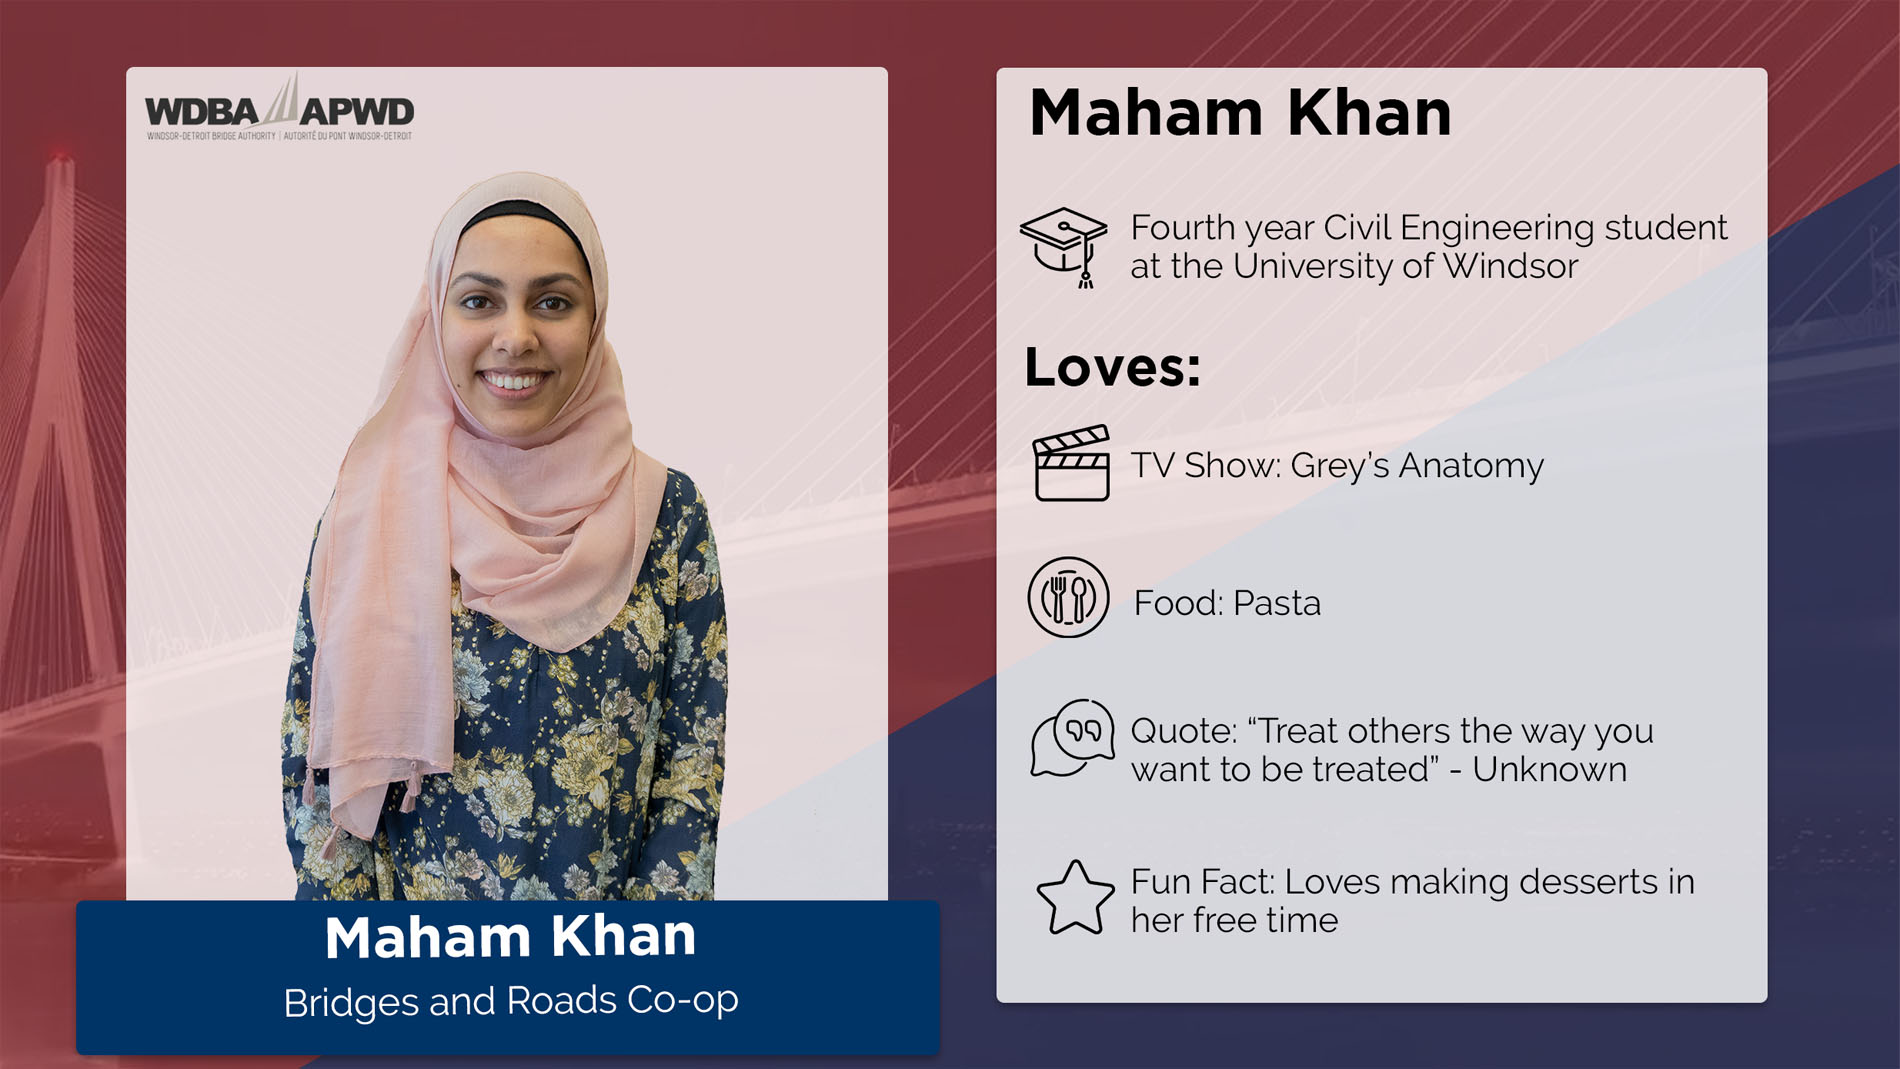 Marham Khan, Bridges and Roads Co-op. Fourth year Civil Engineering student at the University of Windsor. Loves: TV Show: Grey's Anatomy. Food: Pasta. Quote: "Treat others the way you want to be treated" - Unknown. Fun Fact: Loves making desserts in her free time. 